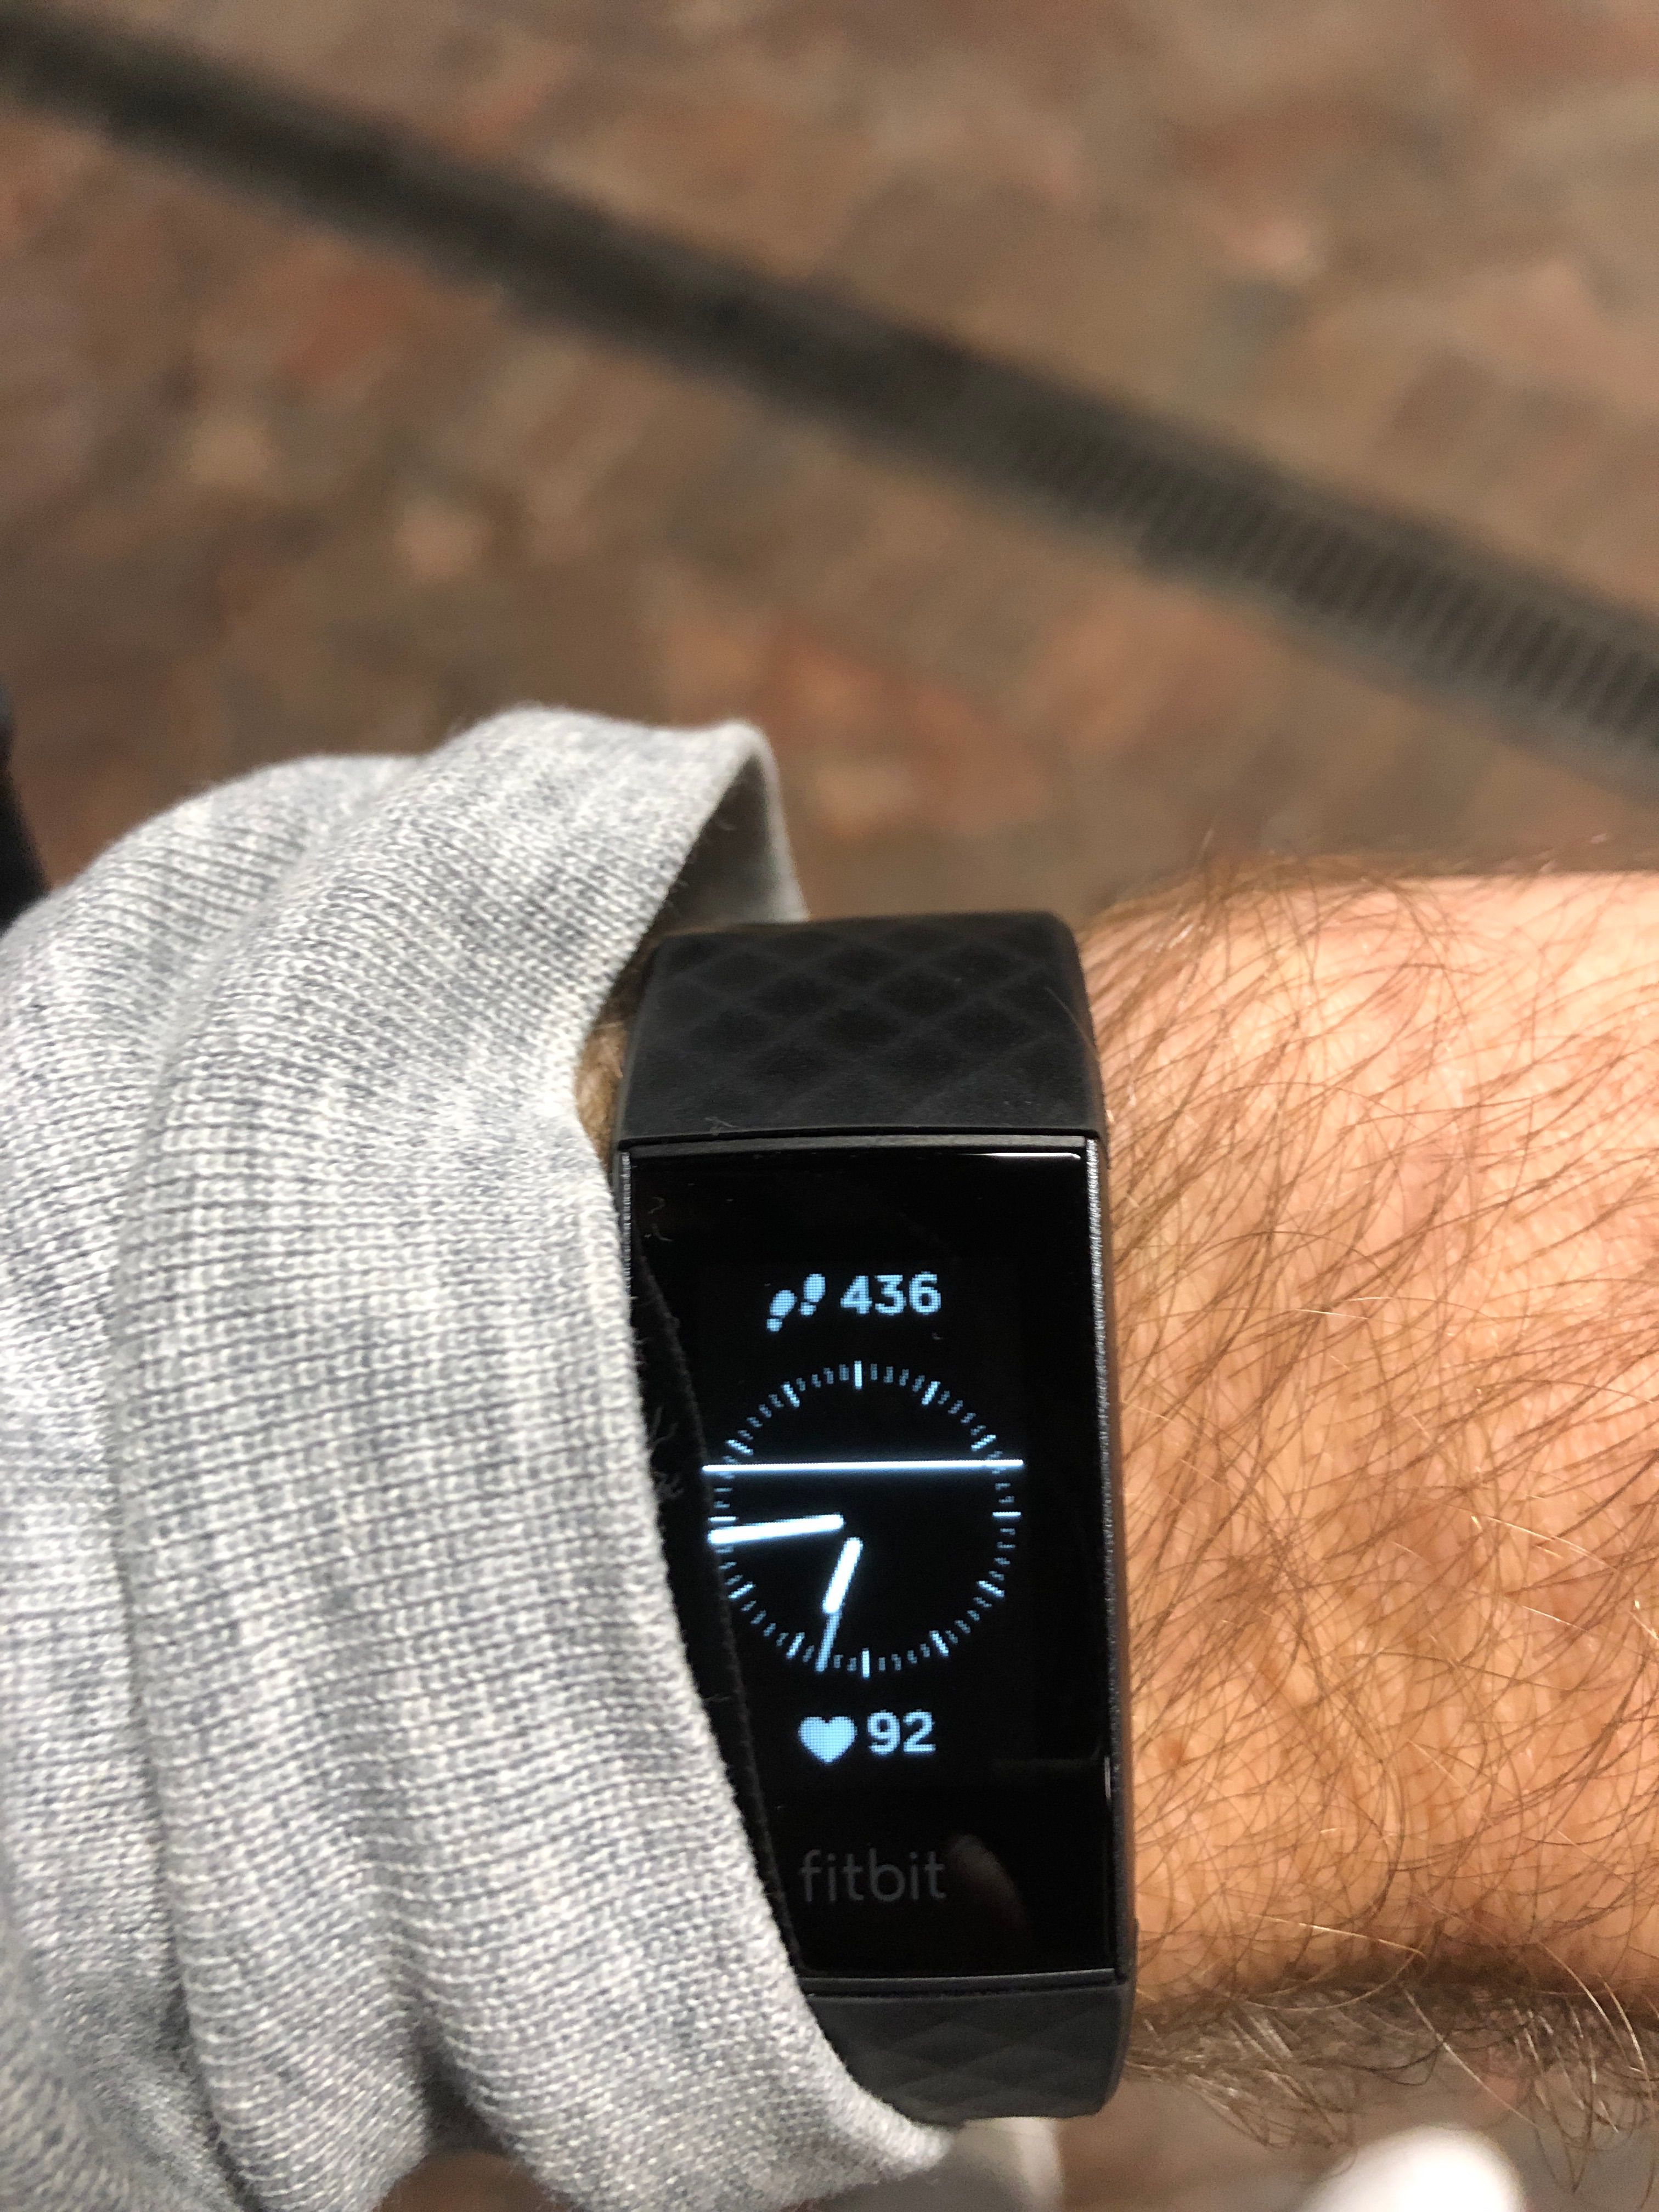 fitbit for galaxy s8